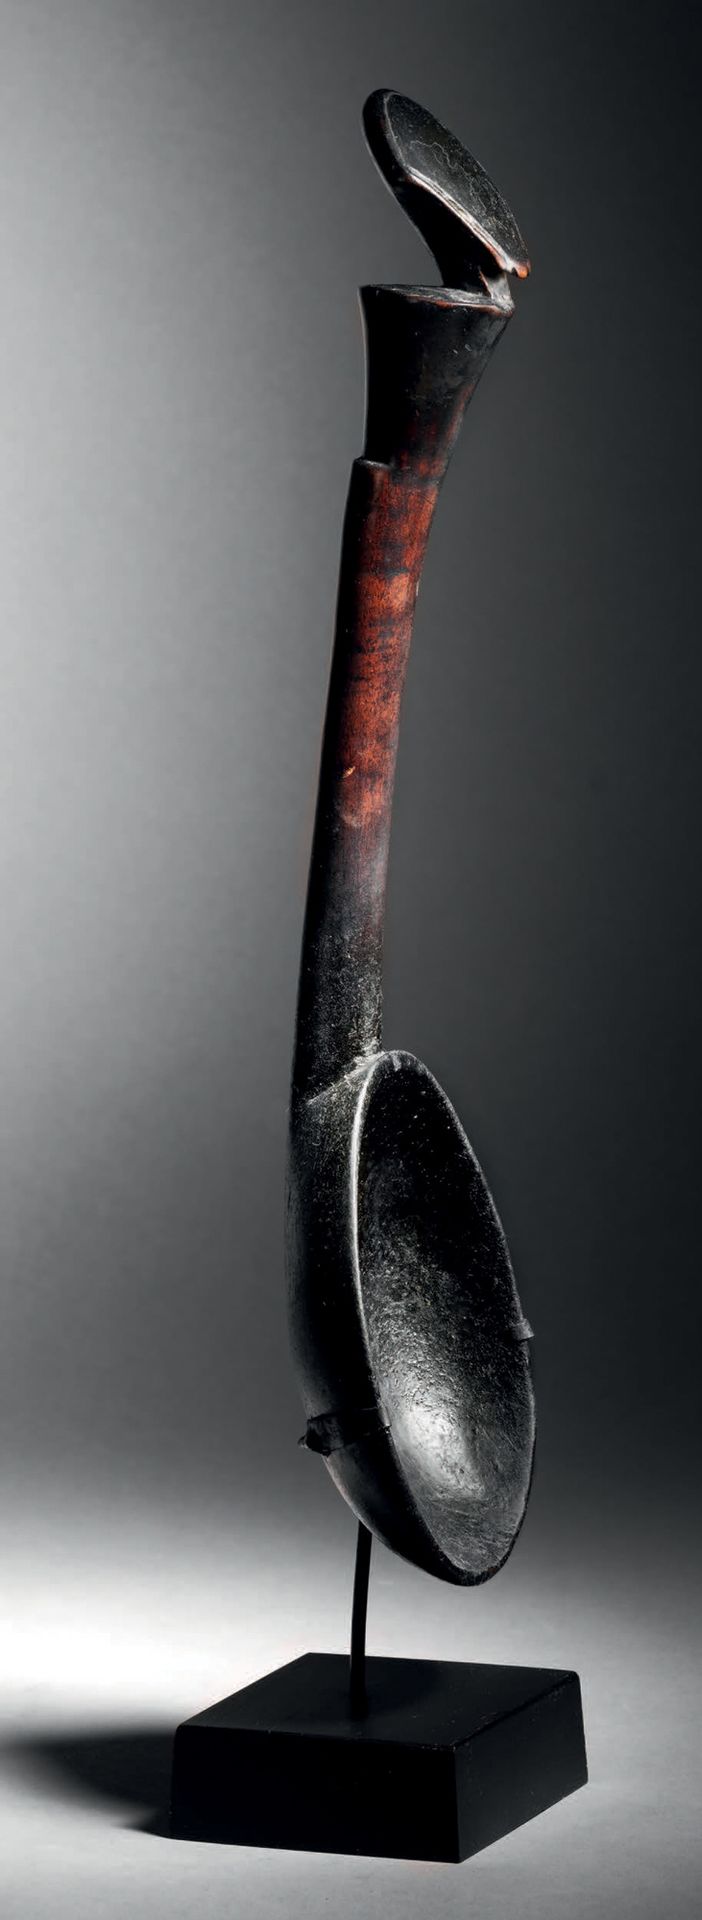 Null Ritual spoon, Gouro, Ivory Coast
Wood with black sooty patina
H. 32.4 cm
Gu&hellip;